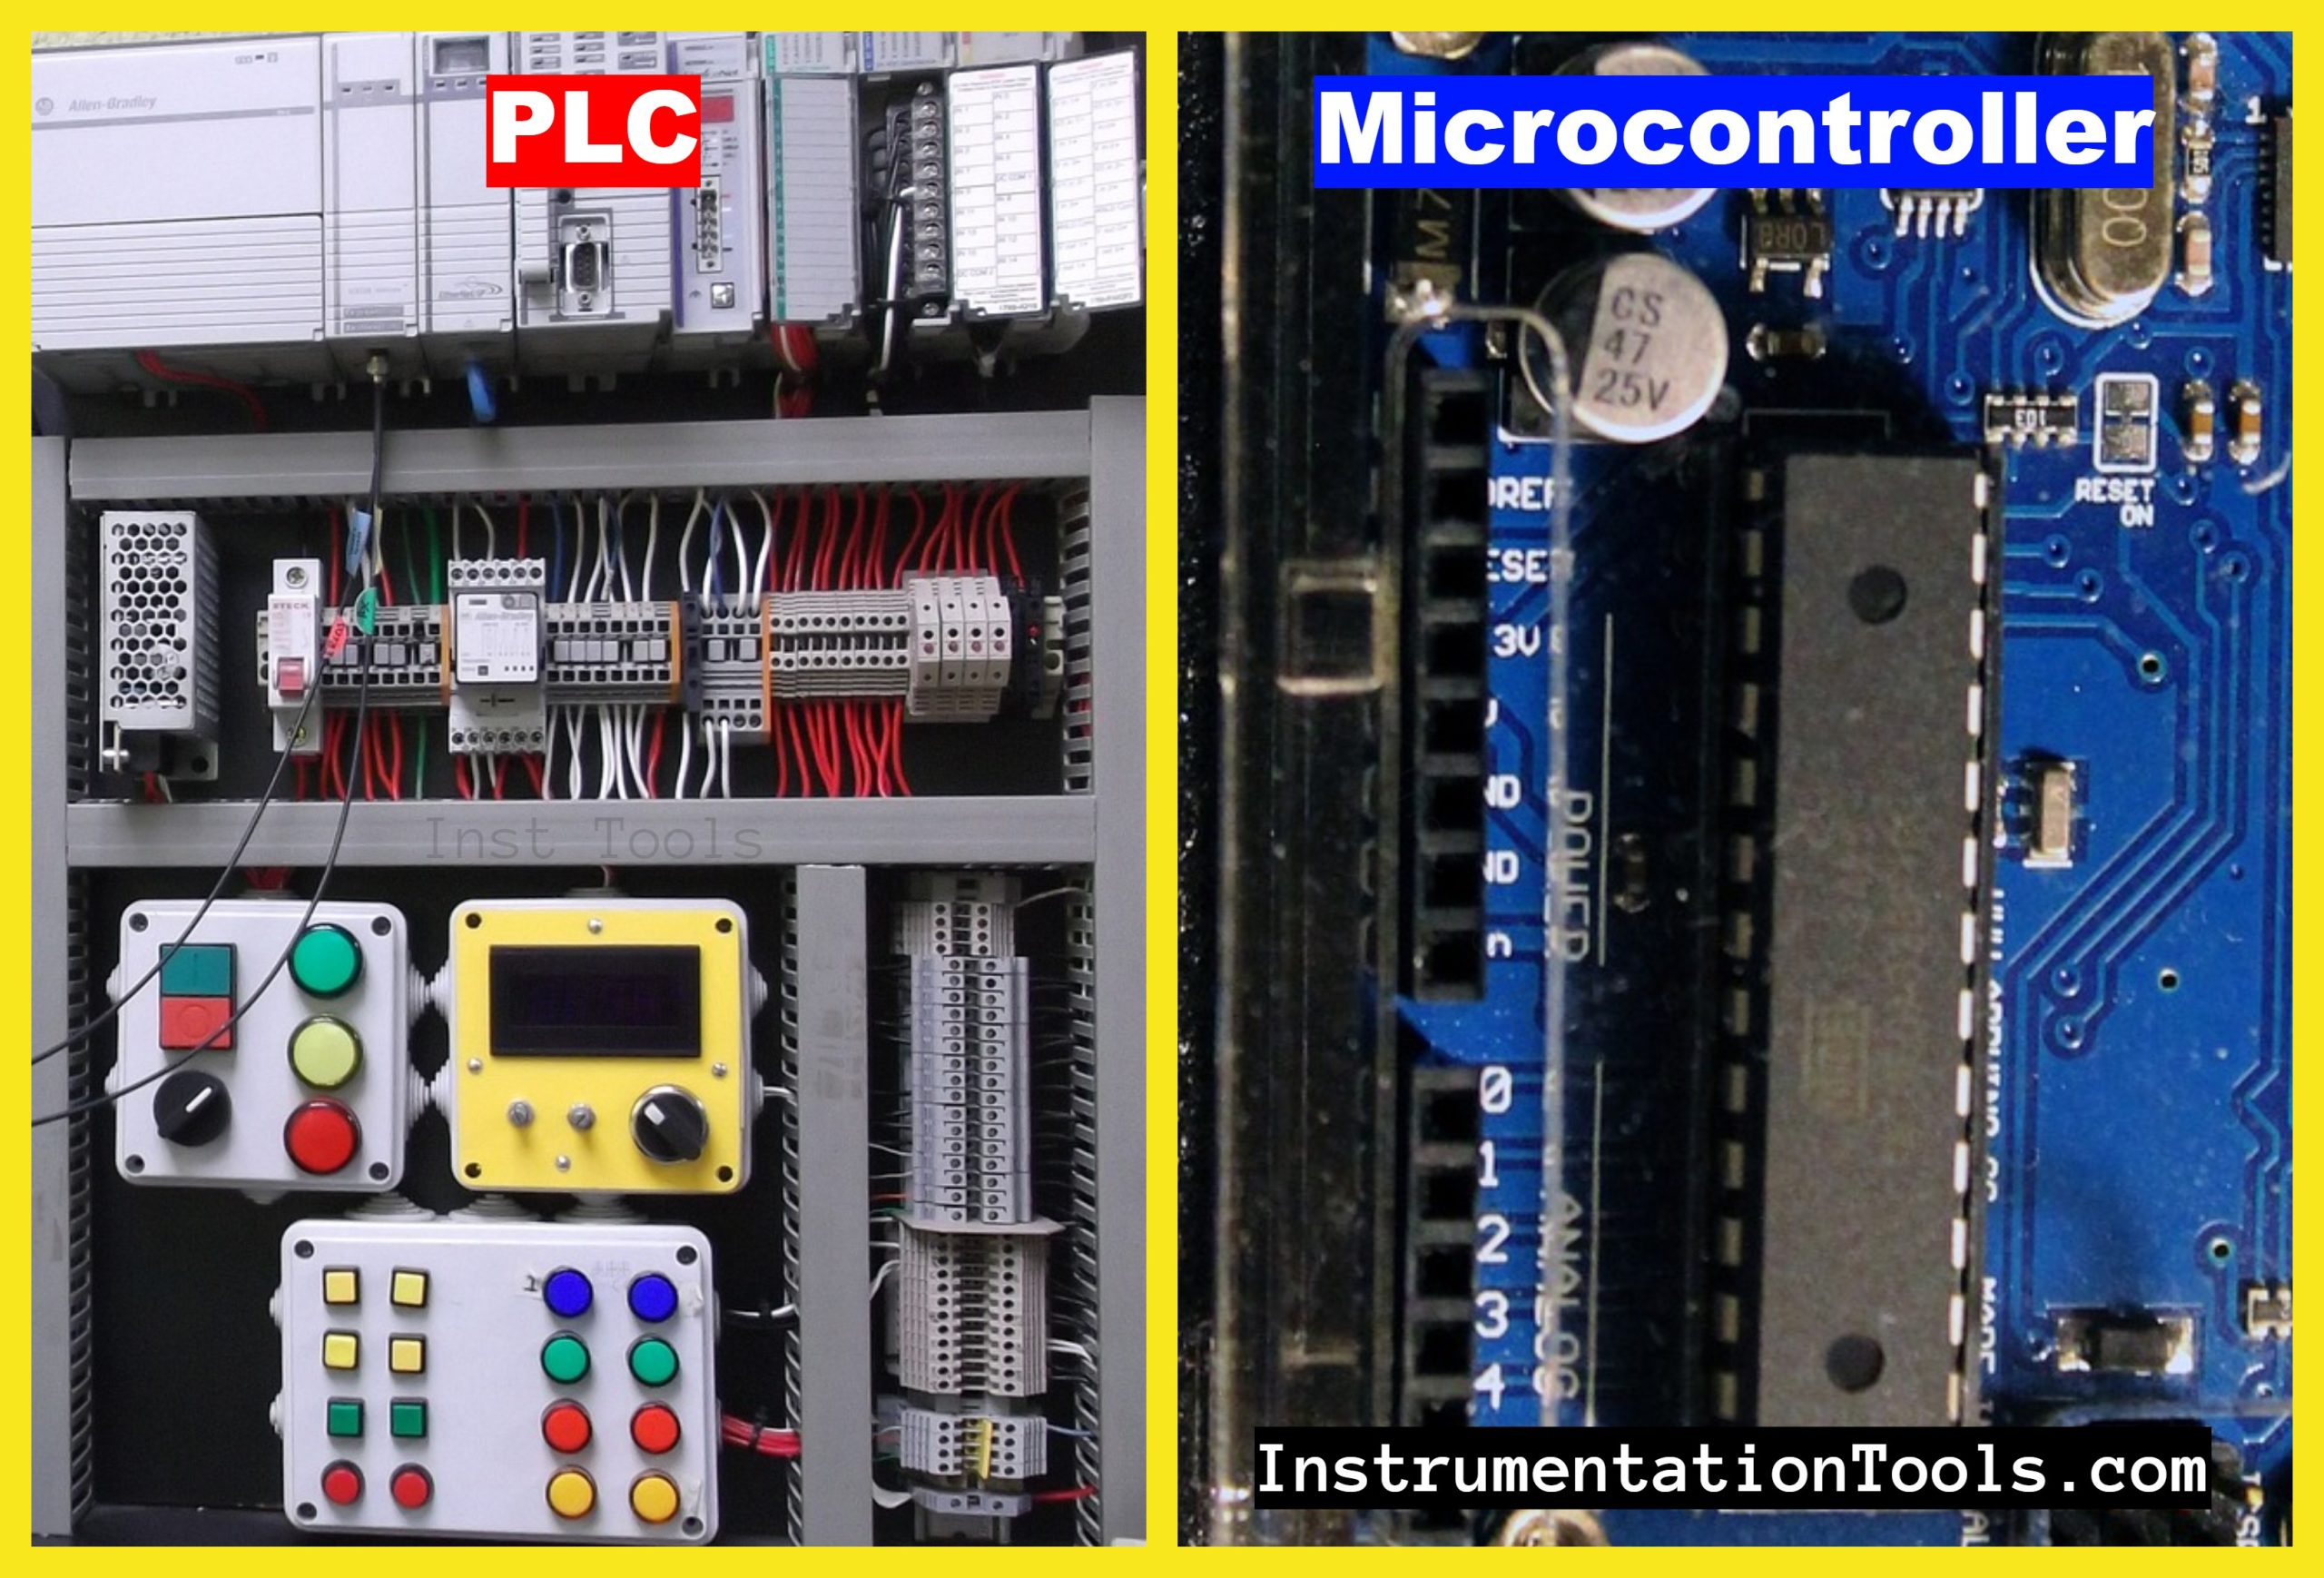 Difference Between Microcontroller and PLC